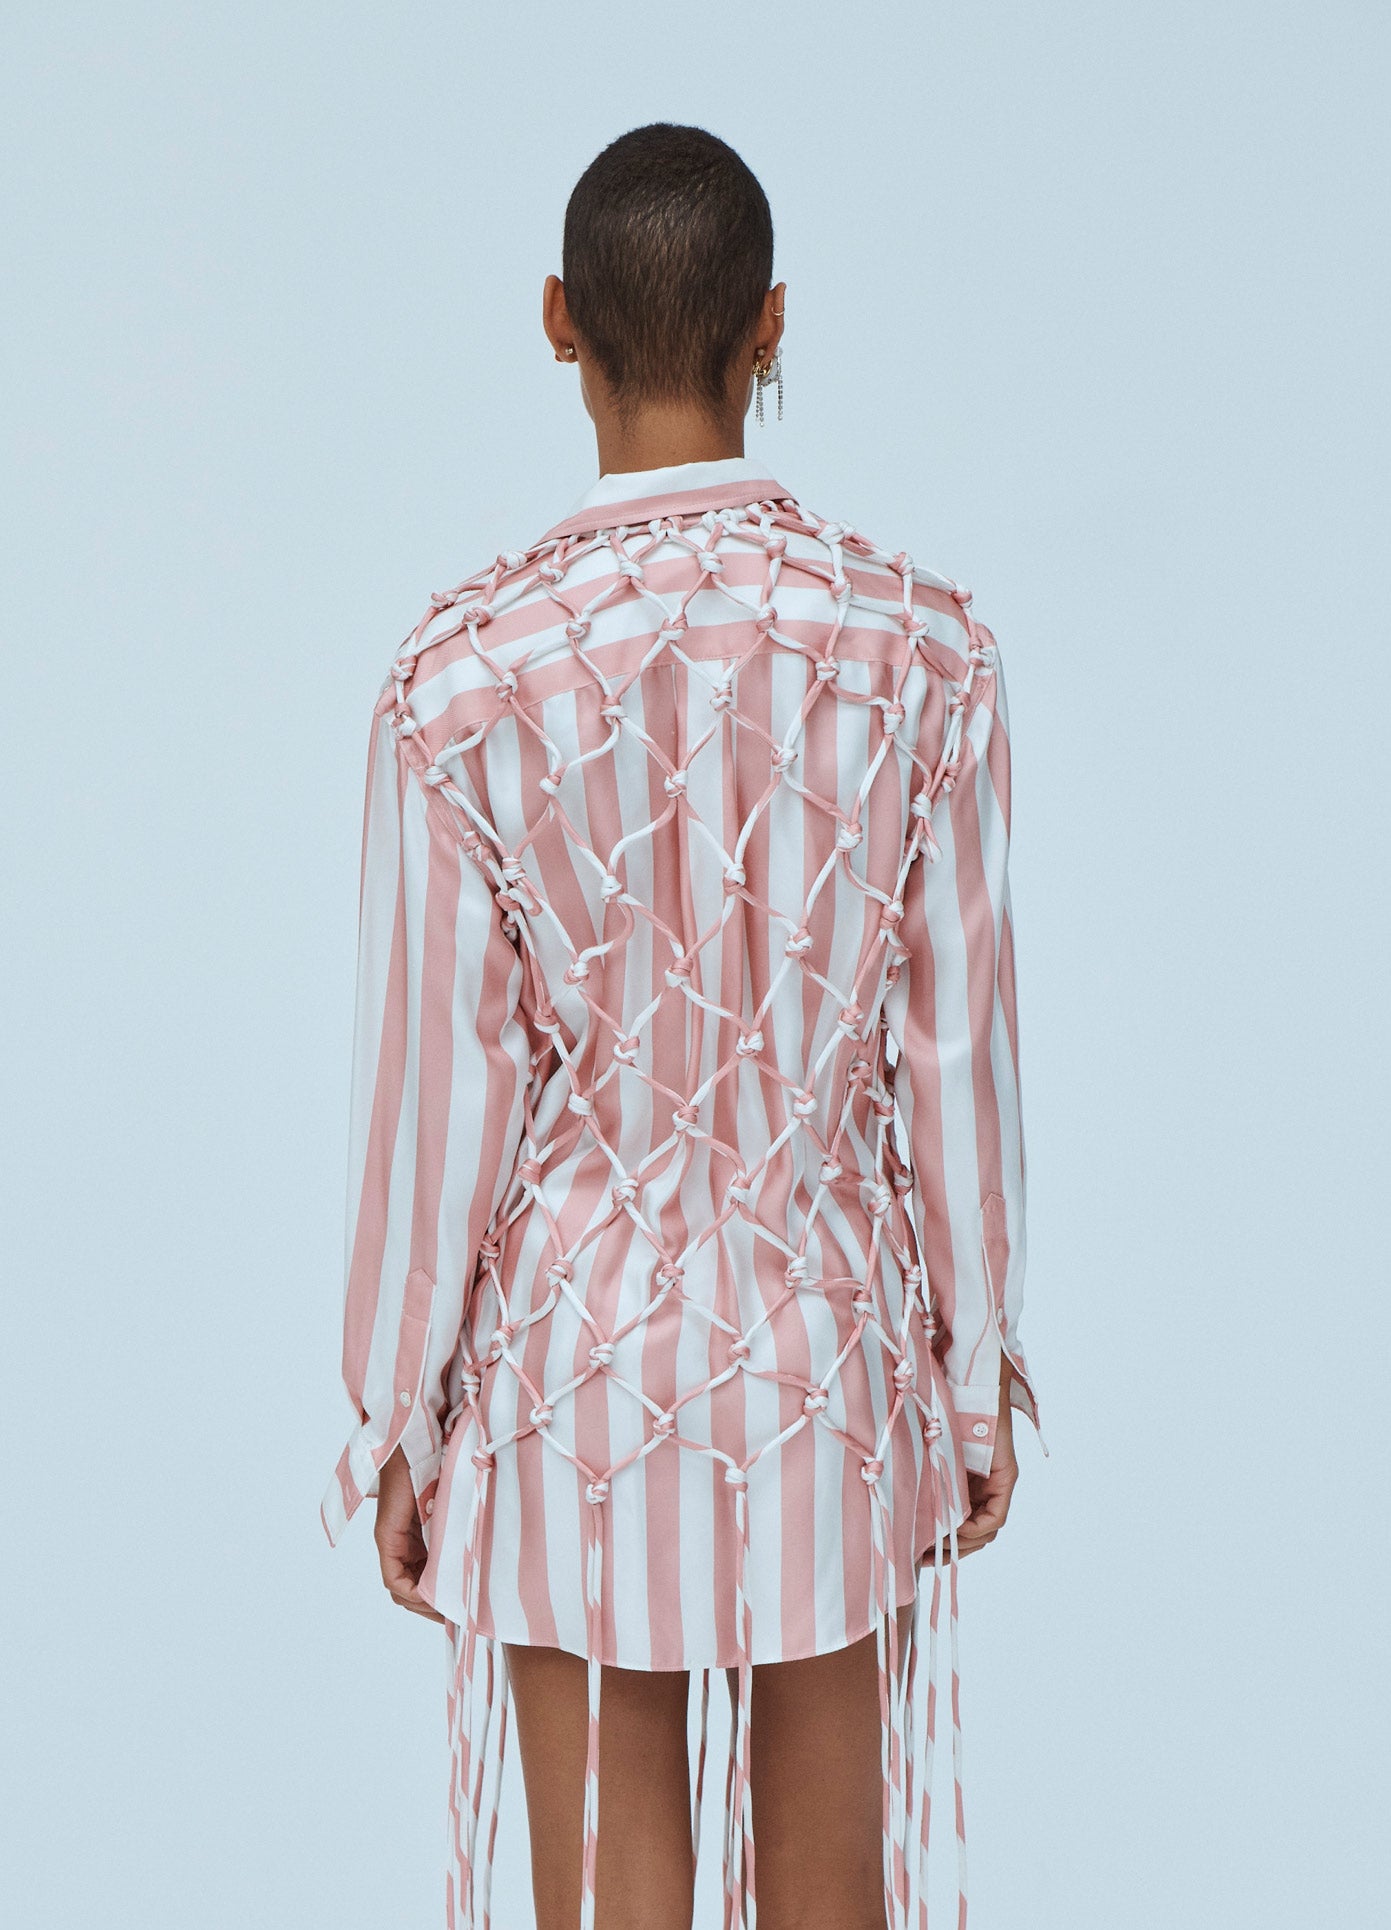 MONSE Fishnet Detail Striped Shirt Dress in Pink and Ivory on Model Back View